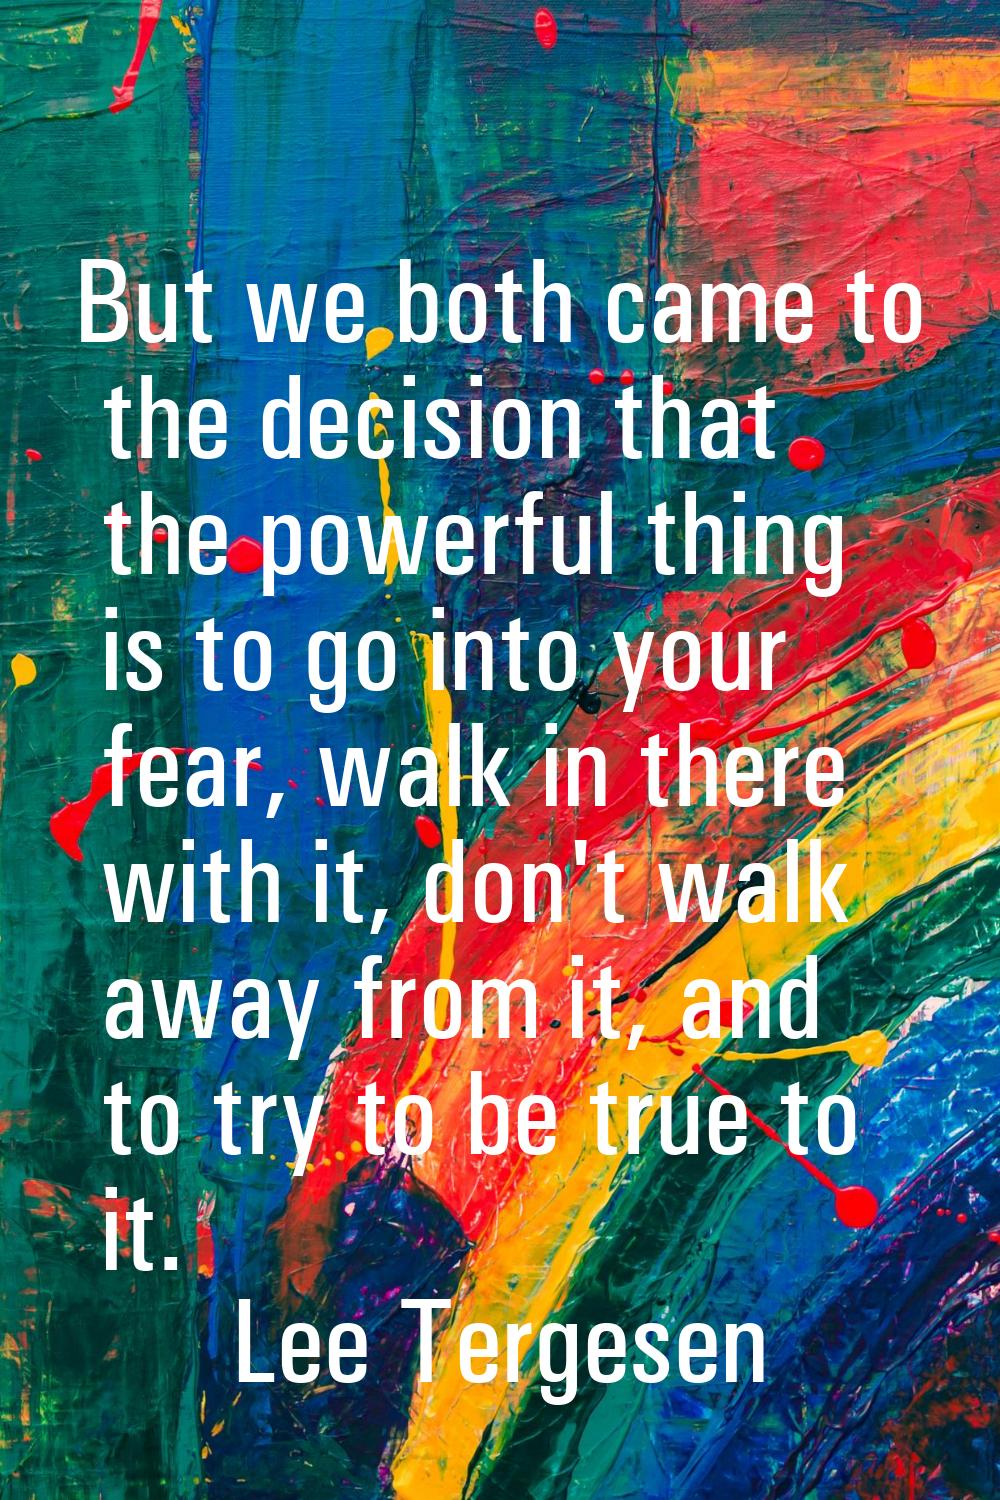 But we both came to the decision that the powerful thing is to go into your fear, walk in there wit